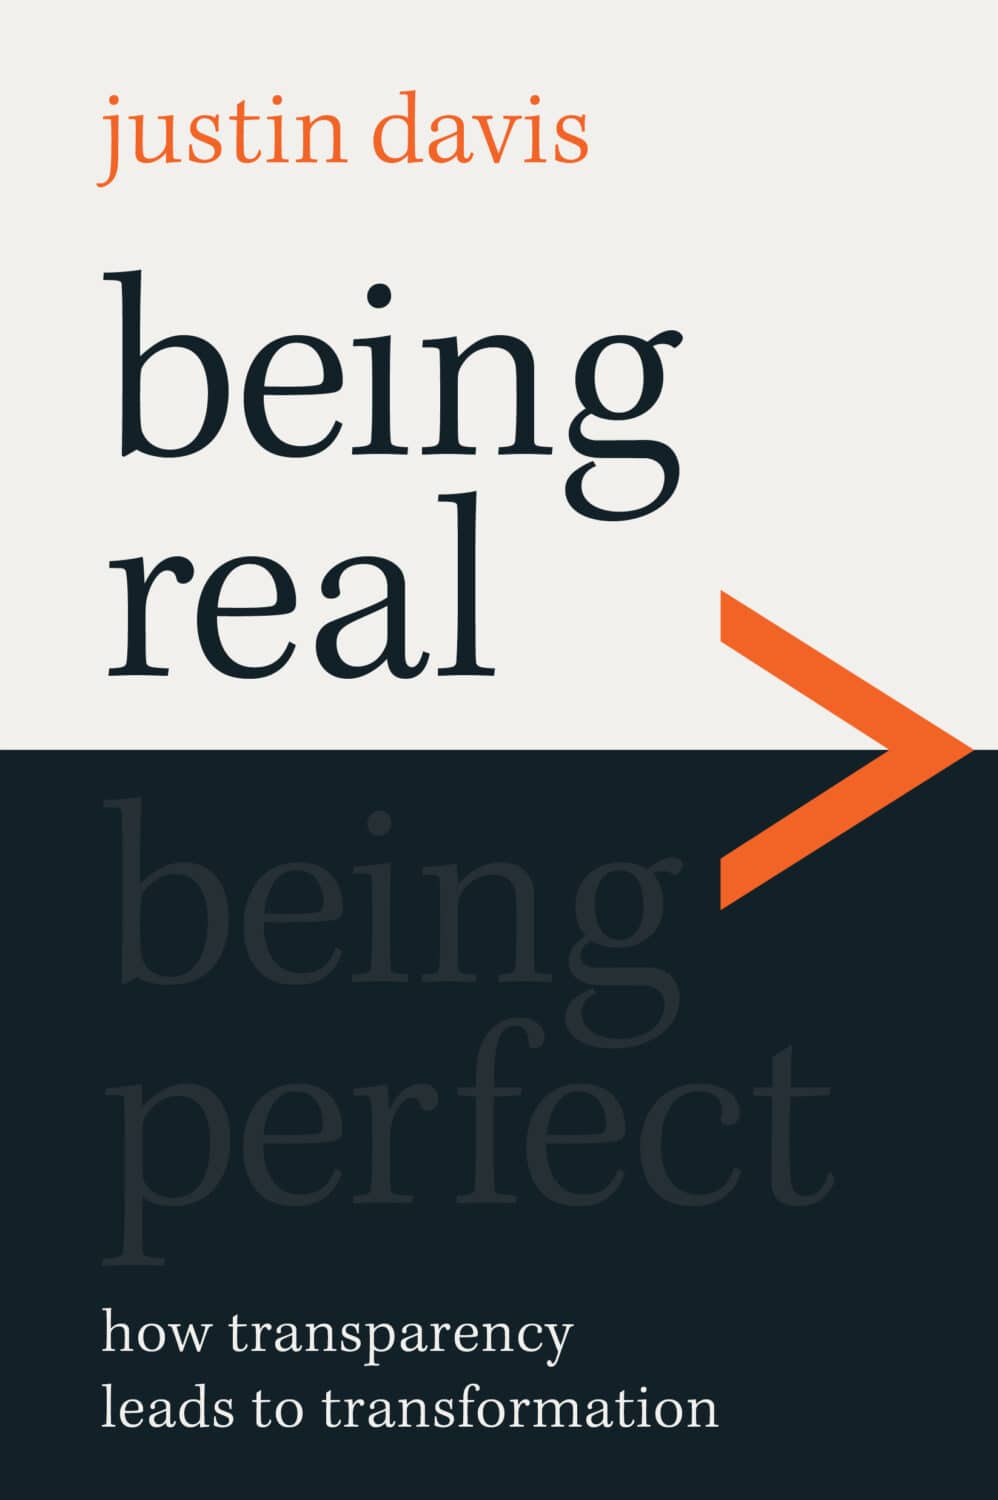 Being Real book cover image